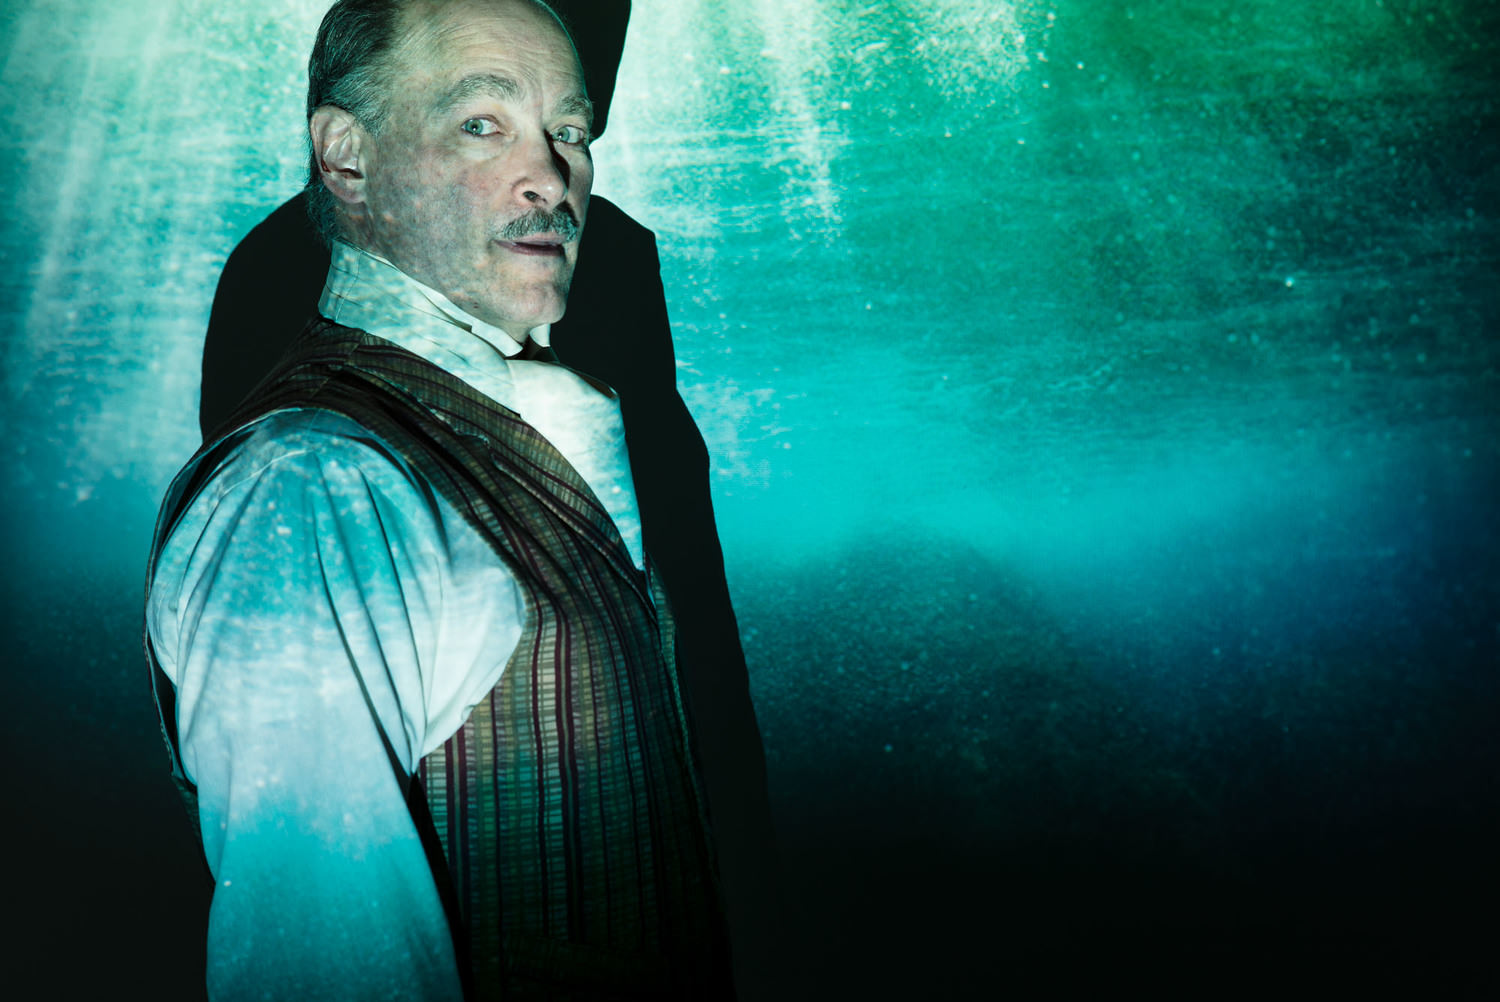 Peter Josephson as Louis deRougemont in theatre KAPOW's Shipwrecked! An Entertainment, February 22 - March 2 at the Derry Opera House. .http://www.tkapow.com/. Photo by Matthew Lomanno.